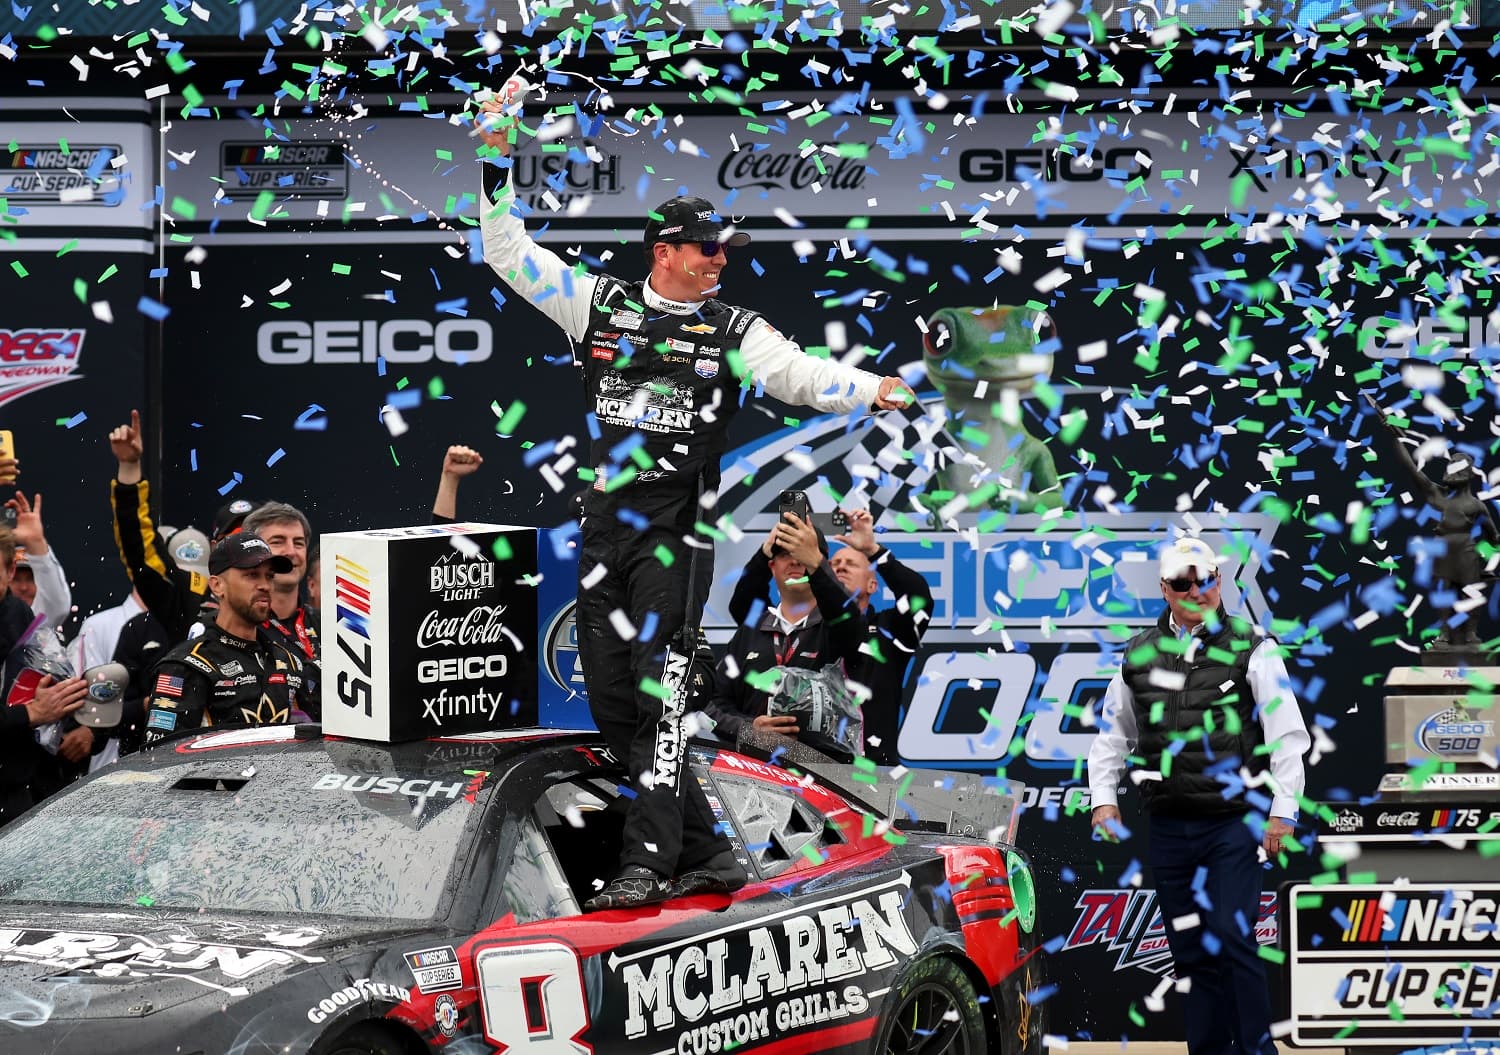 Kyle Busch, driver of the No. 8 McLaren Custom Grills Chevrolet, celebrates in Victory Lane after winning the NASCAR Cup Series GEICO 500 at Talladega Superspeedway on April 23, 2023. | James Gilbert/Getty Images